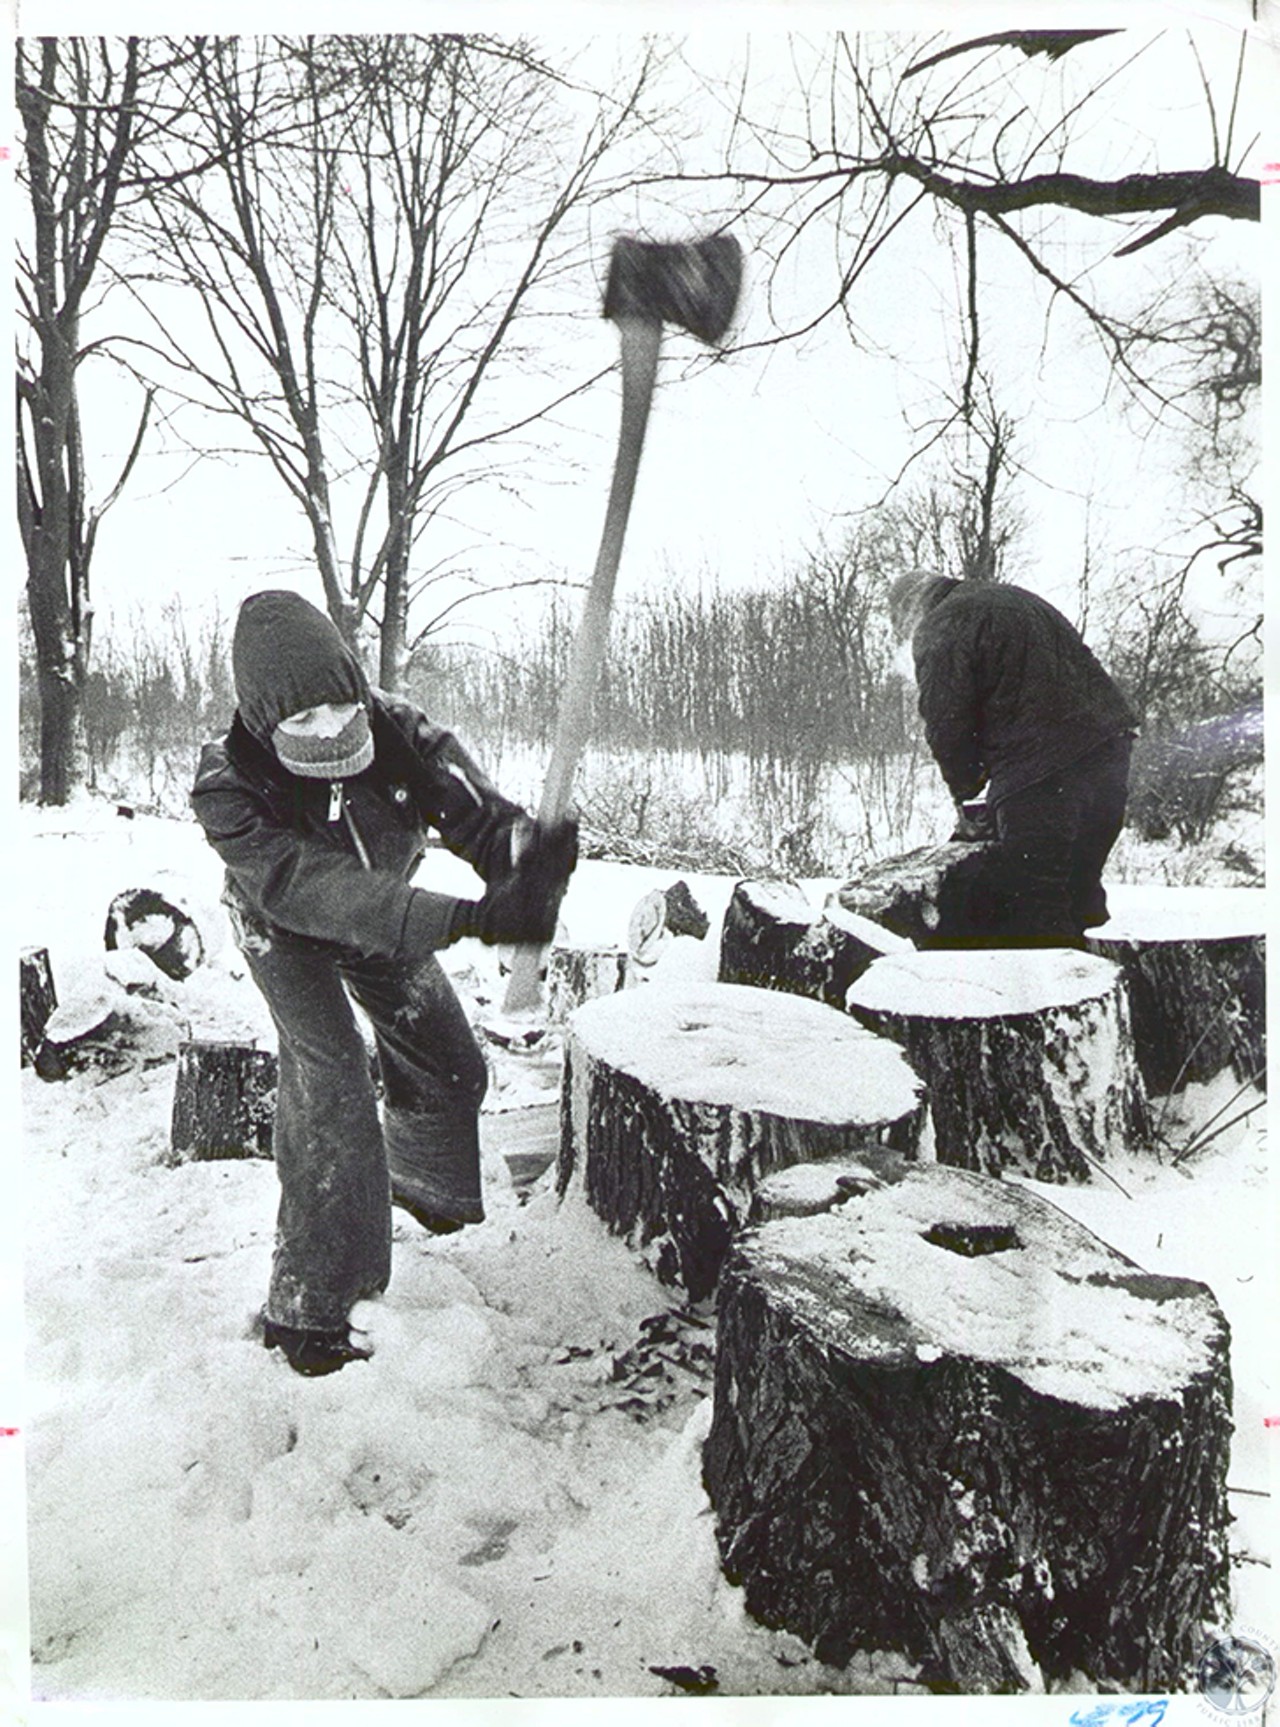 Hebron
"Kenneth Taylor (12) and Carl Taylor (17) chopping wood to heat their house."